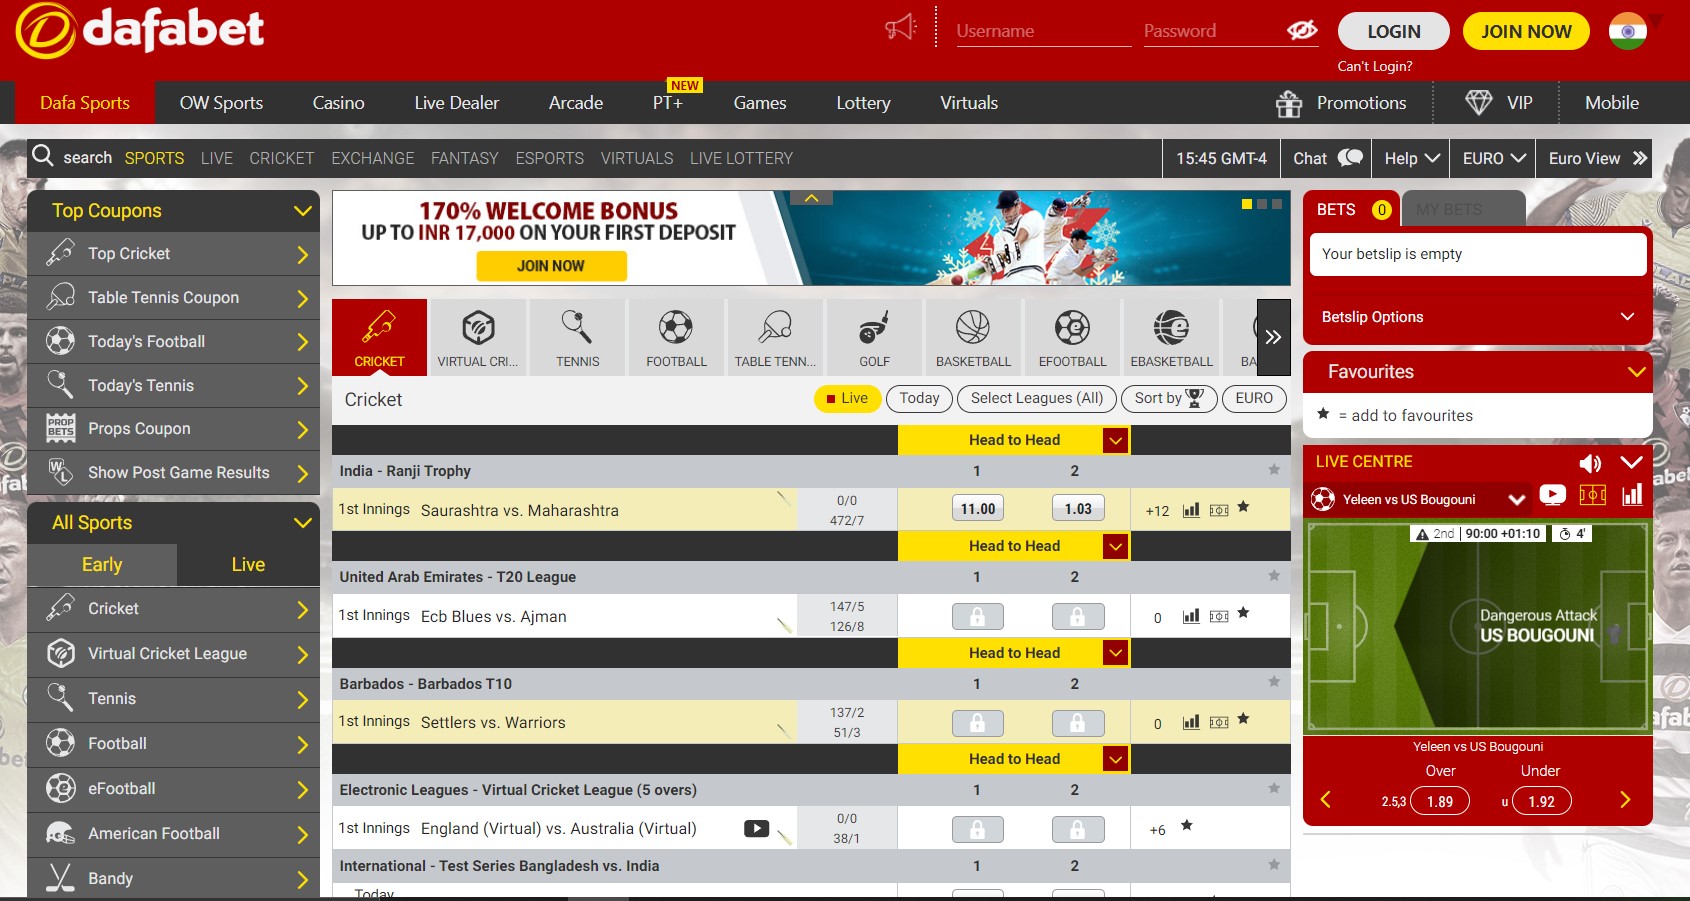 dafabet sports betting review